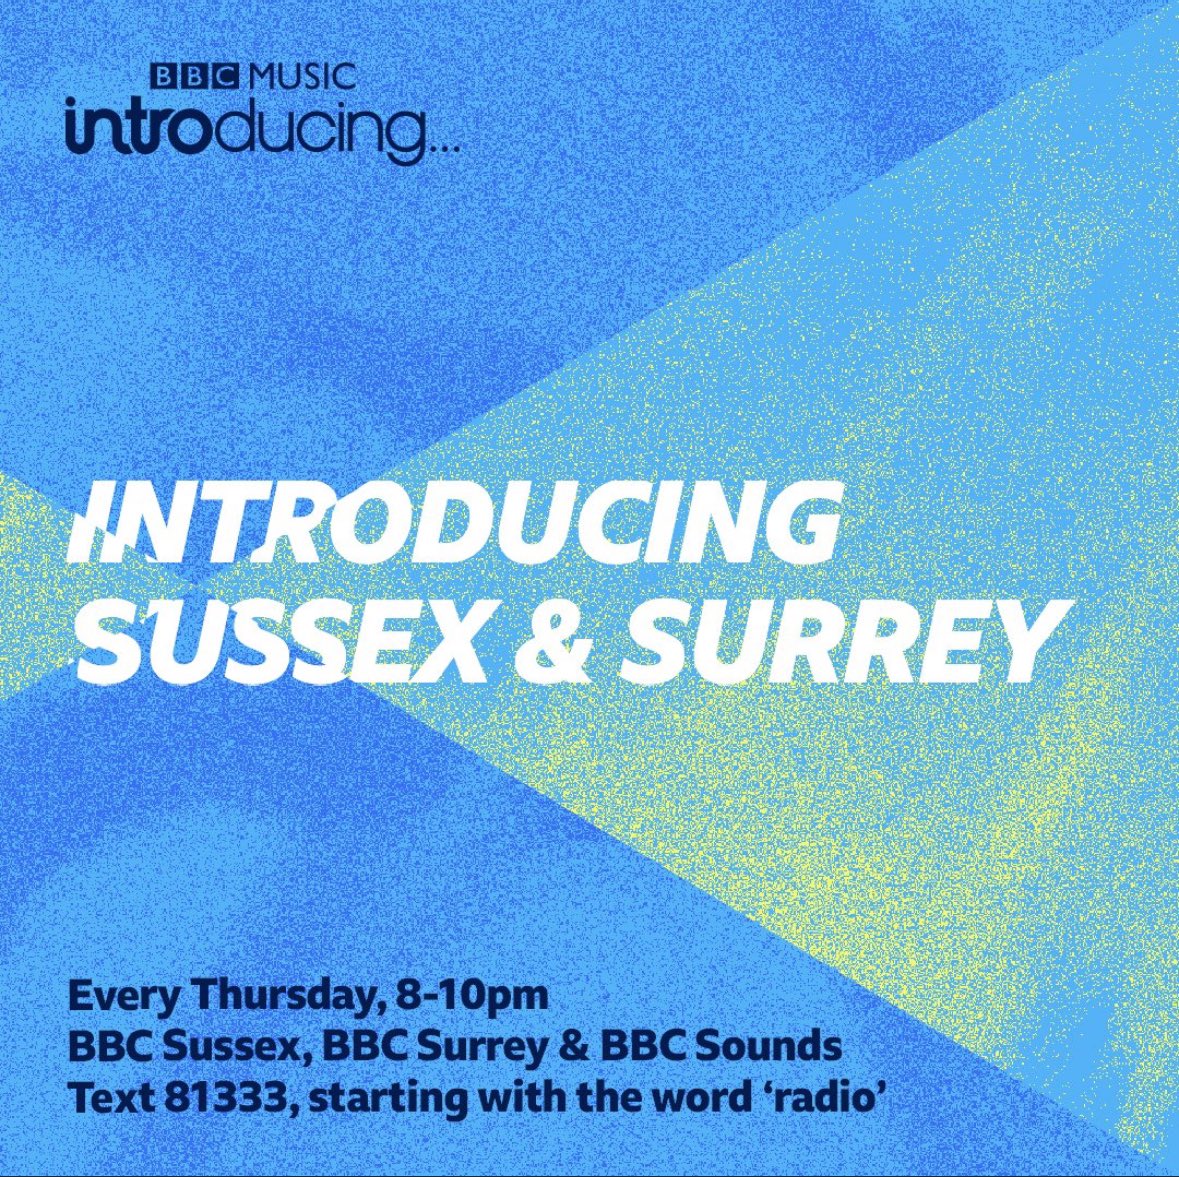 I can’t believe this happening ! This Thurs I am joining broadcasting legend @MelitaRadio @bbcintroducing @BBCSussex @BBCSurrey for a Live Lounge and Interview along with some of my favourite people @LeanneSweetFA @angiebrown @missamypearson @Jasmineknightuk @punkpappa @nekxtman